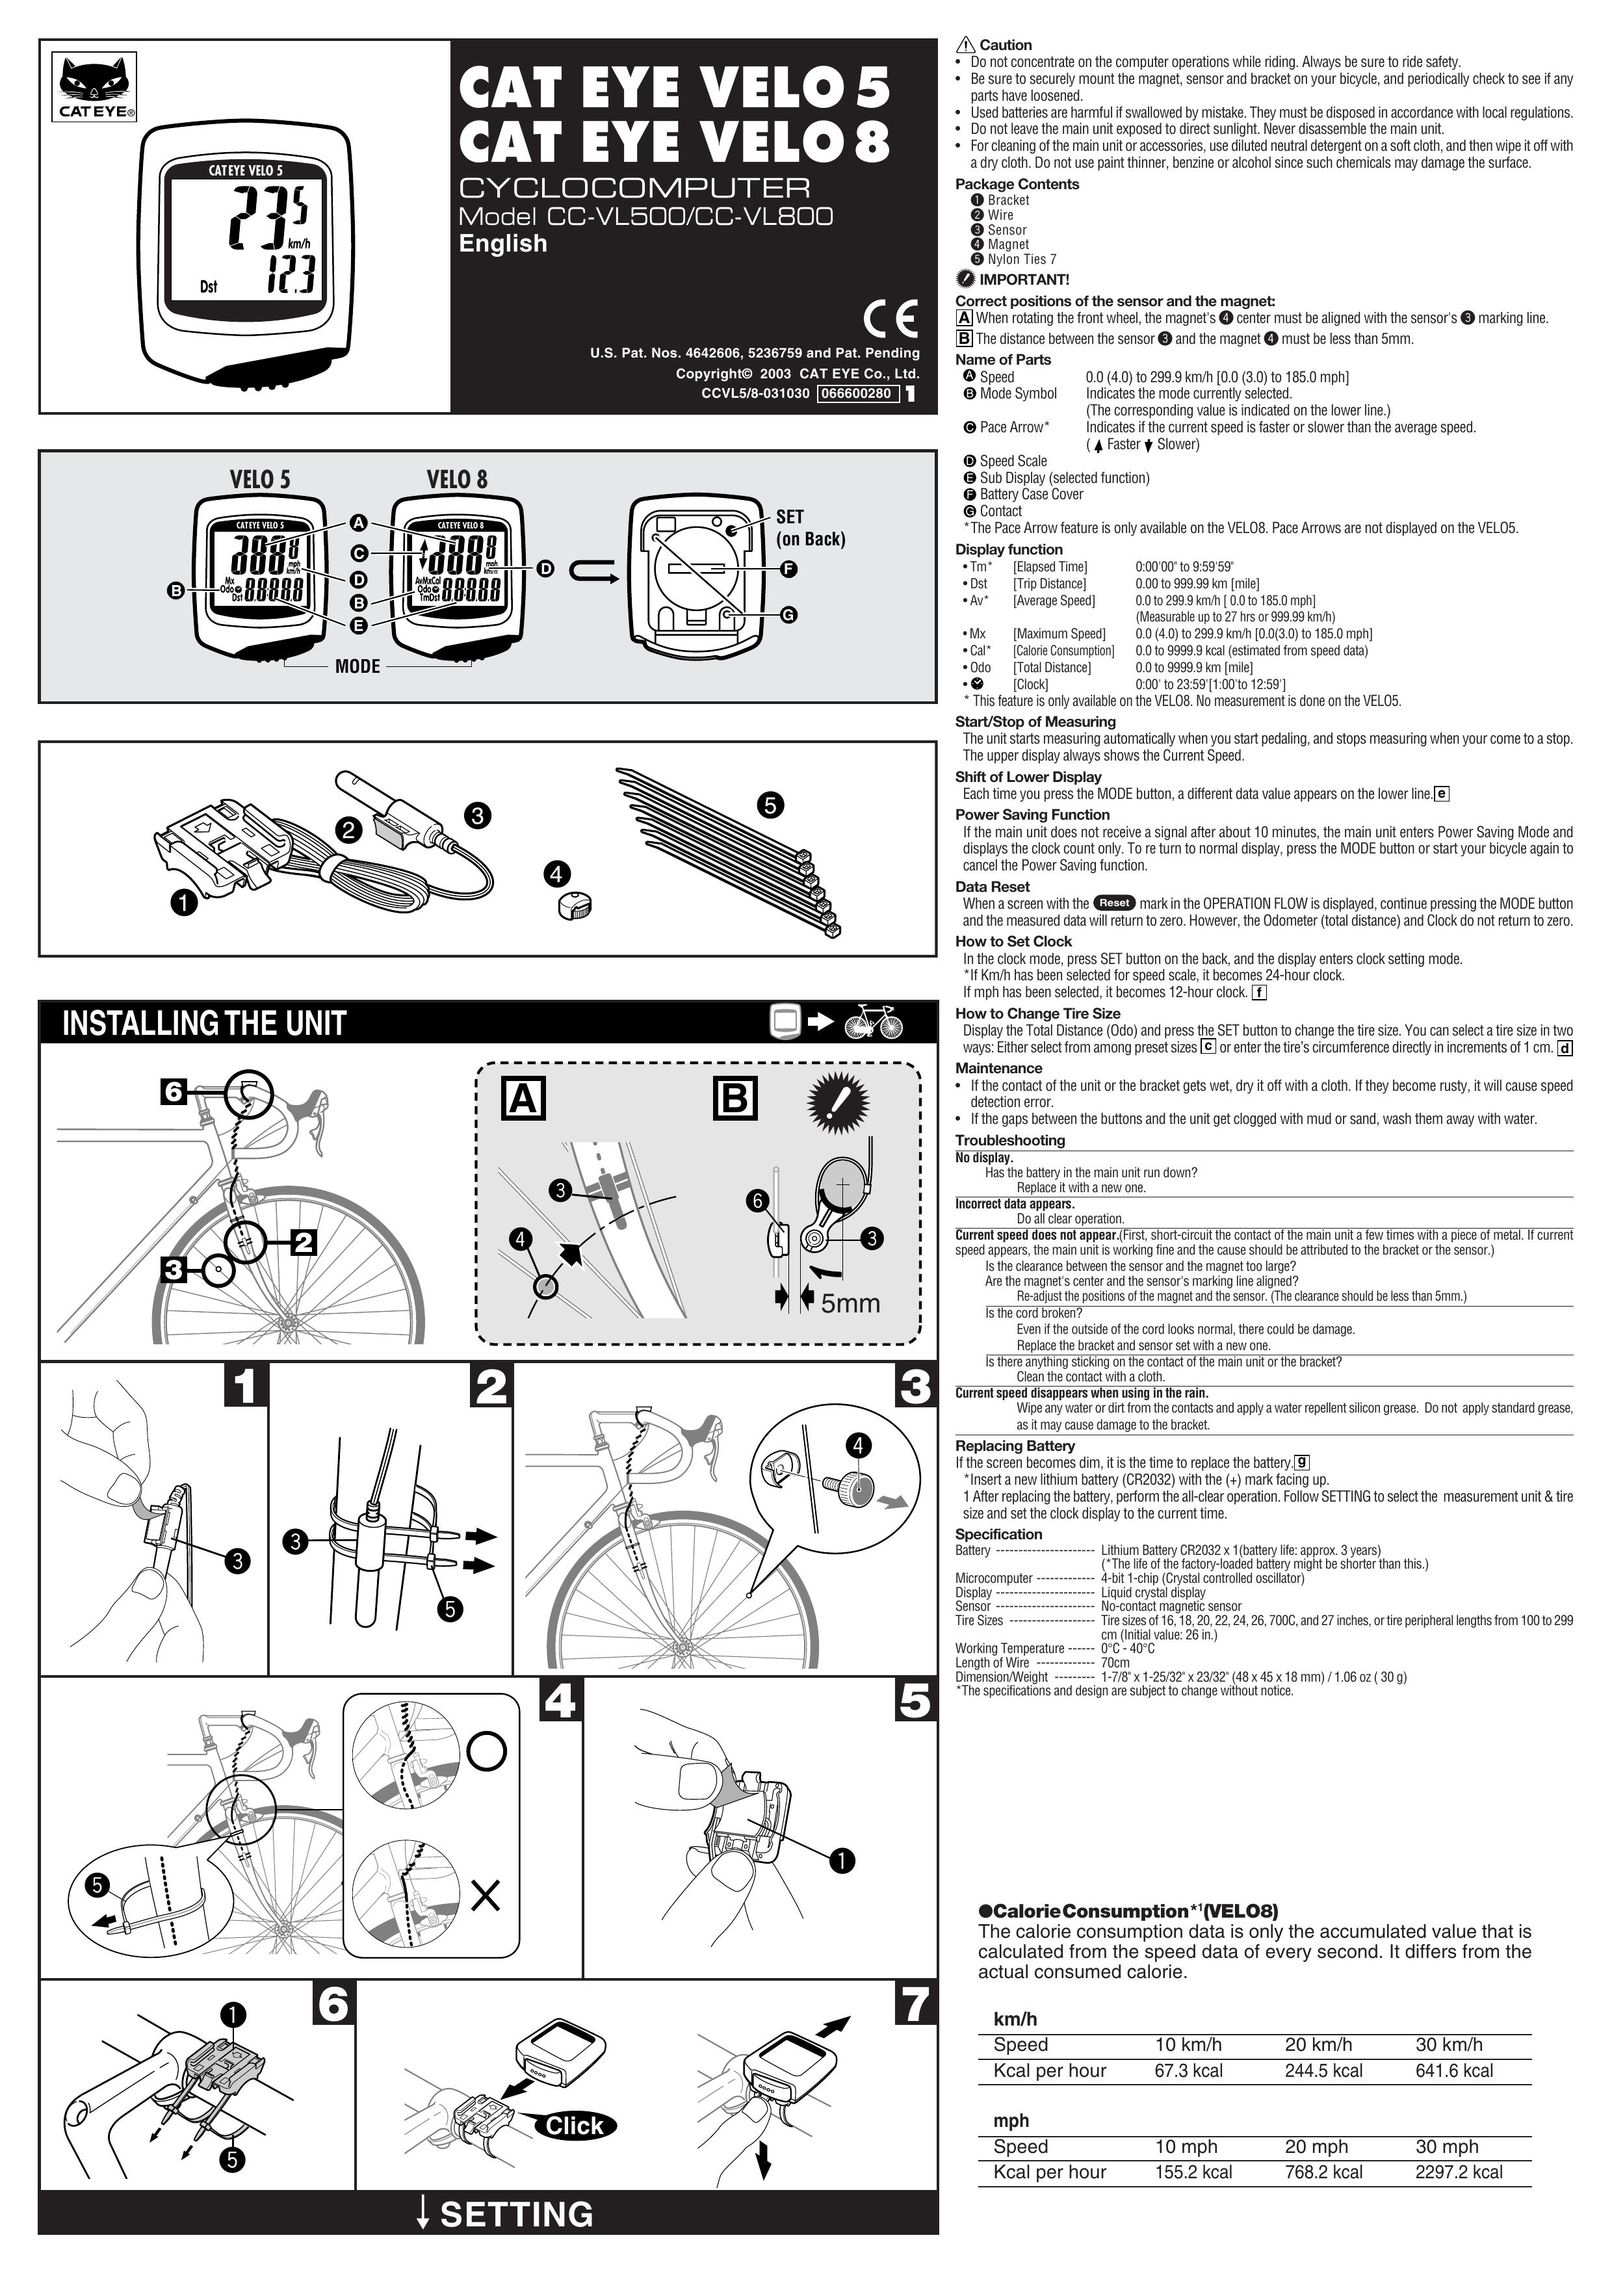 Cateye CC-VL800 Bicycle Accessories User Manual (Page 1)